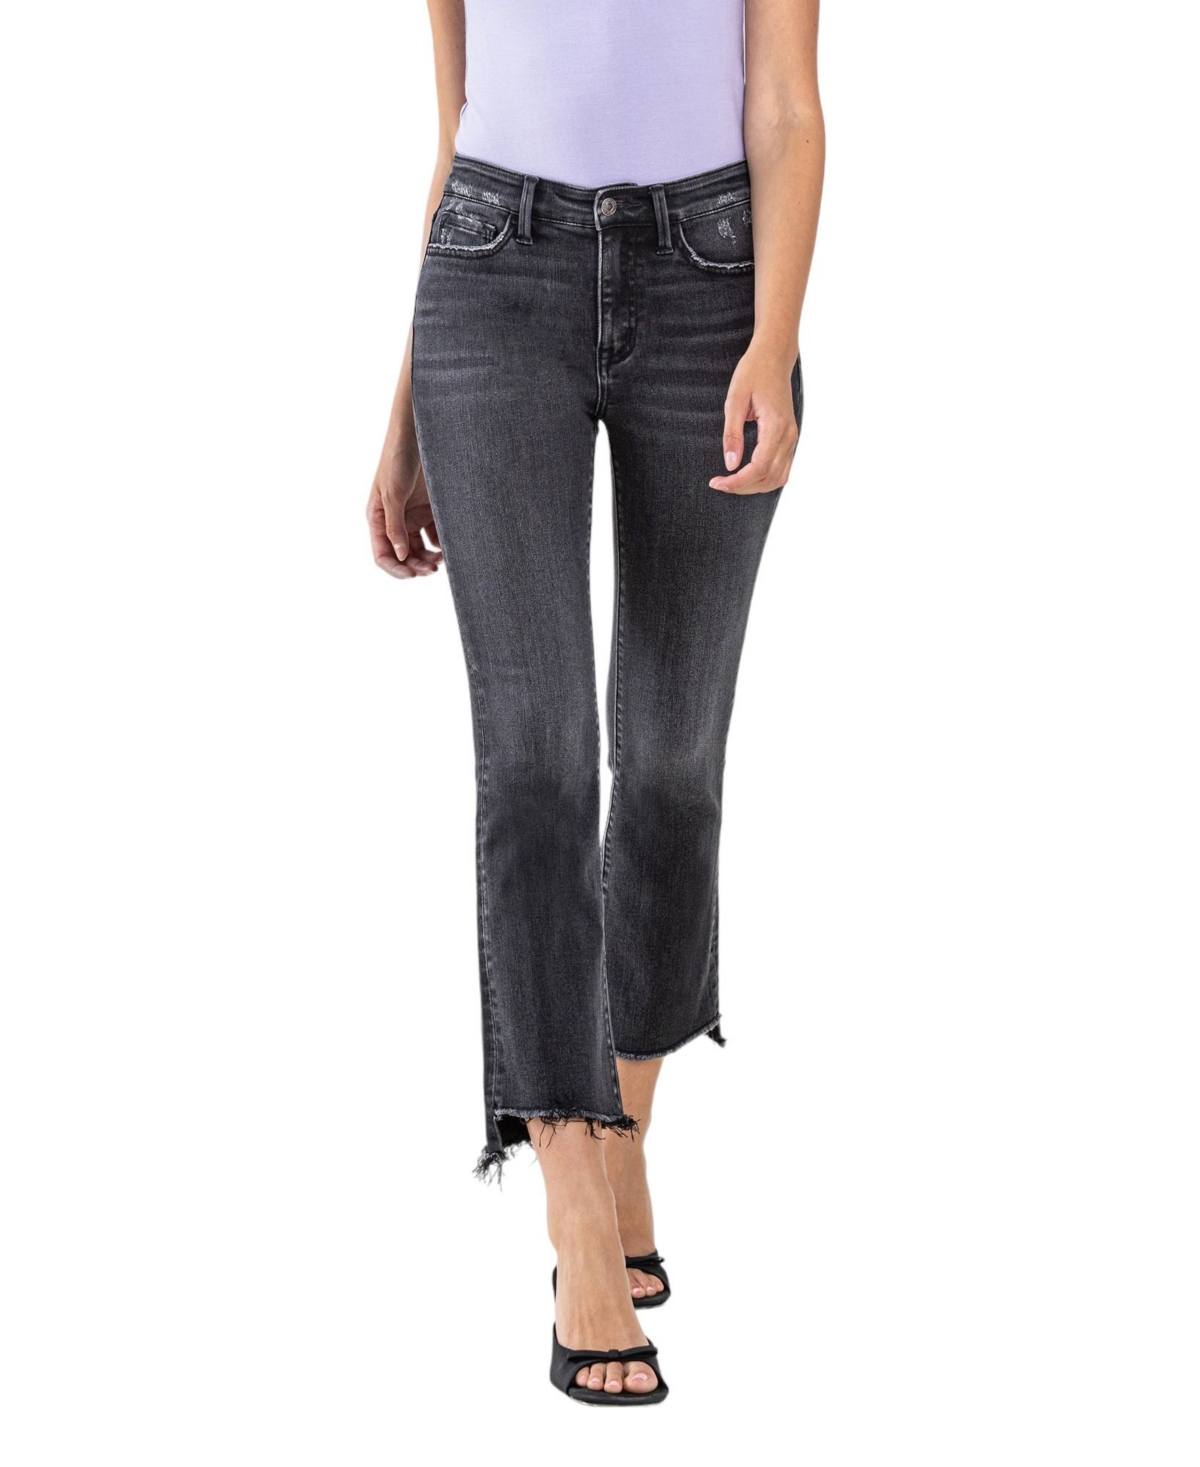 Women's High Rise Cropped Flare Jeans - Righteousness black